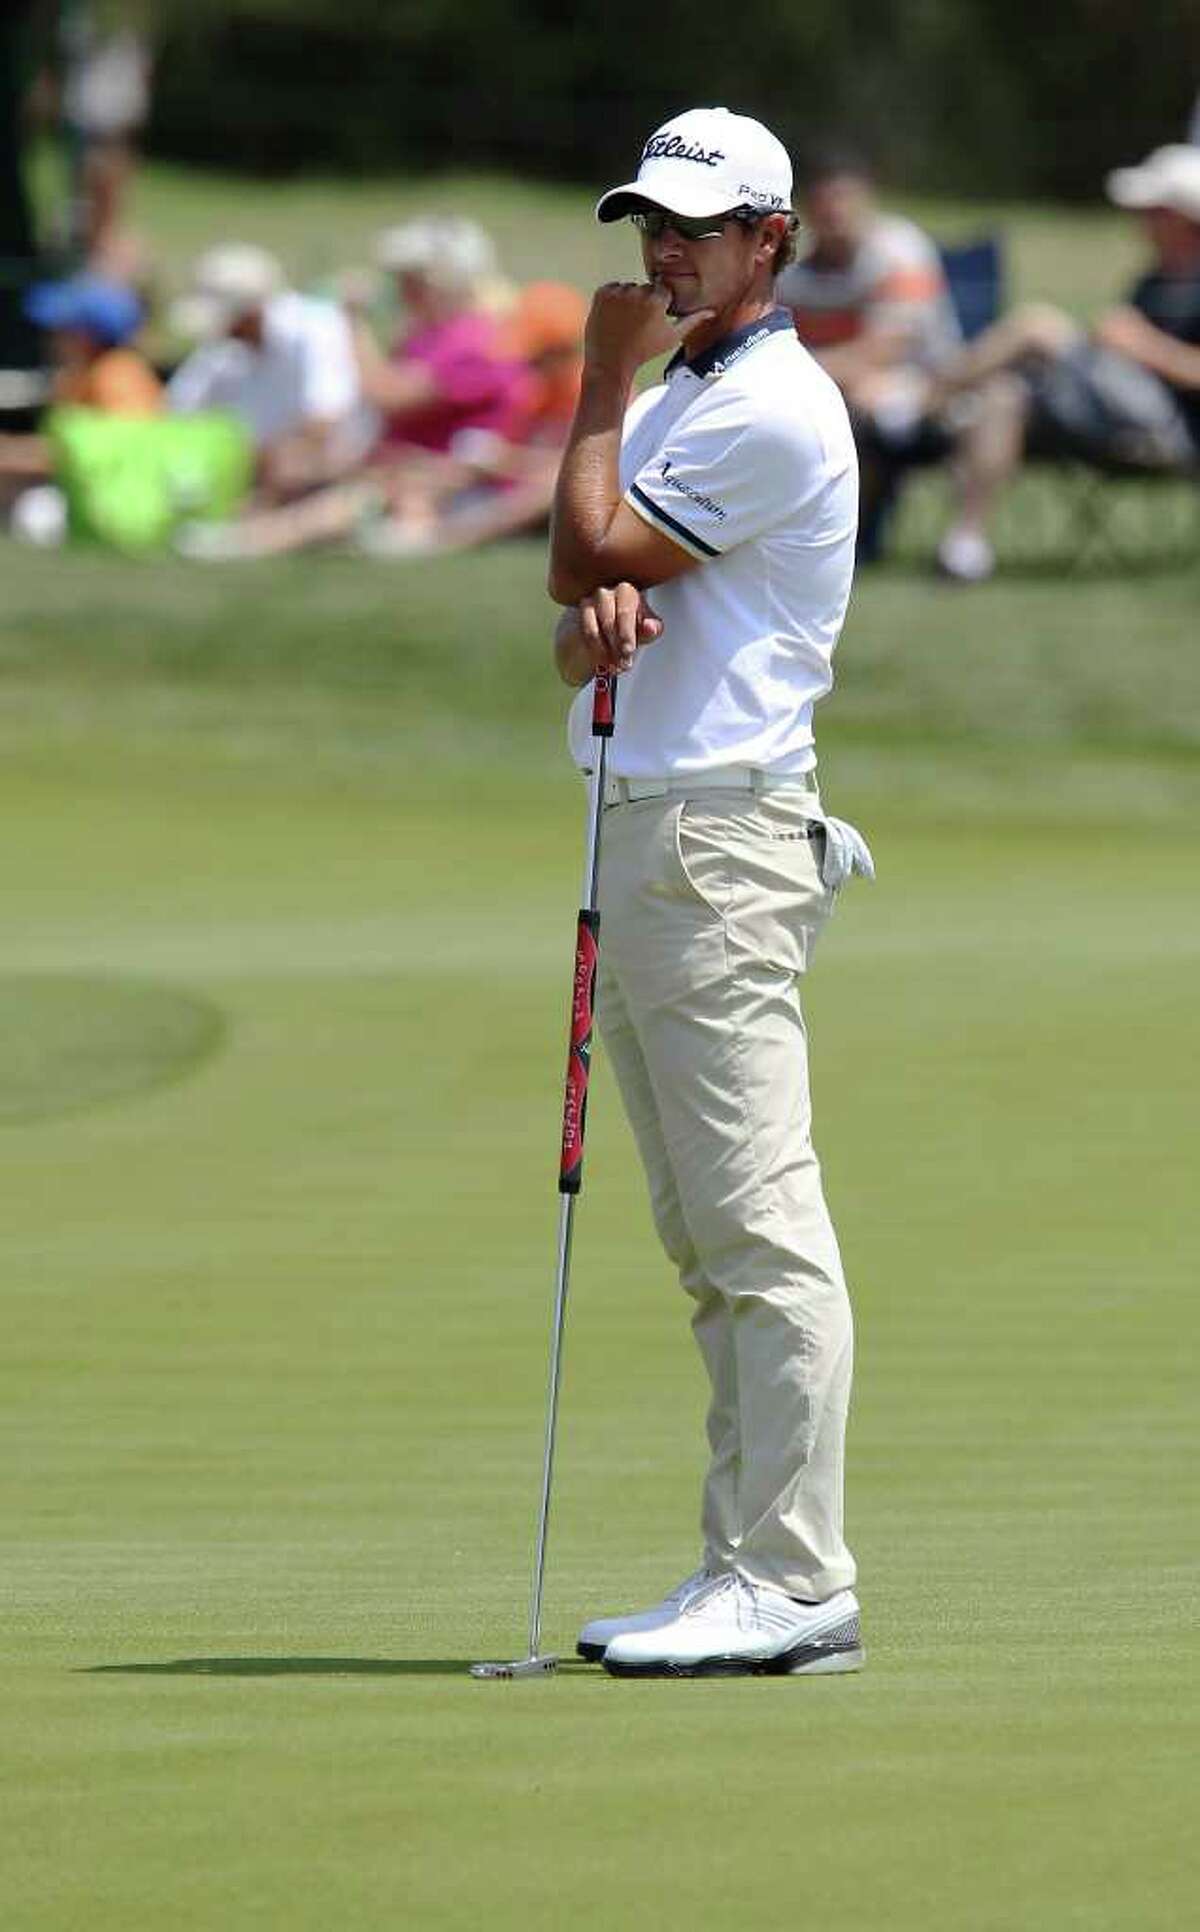 2010 champion Adam Scott ponders a missed putt on No. 7 during the final round at the 2011 Valero Texas Open at the AT&T Oaks Course at TPC San Antonio on Saturday, April 16, 2011. Scott finished 23rd. Kin Man Hui/kmhui@express-news.net